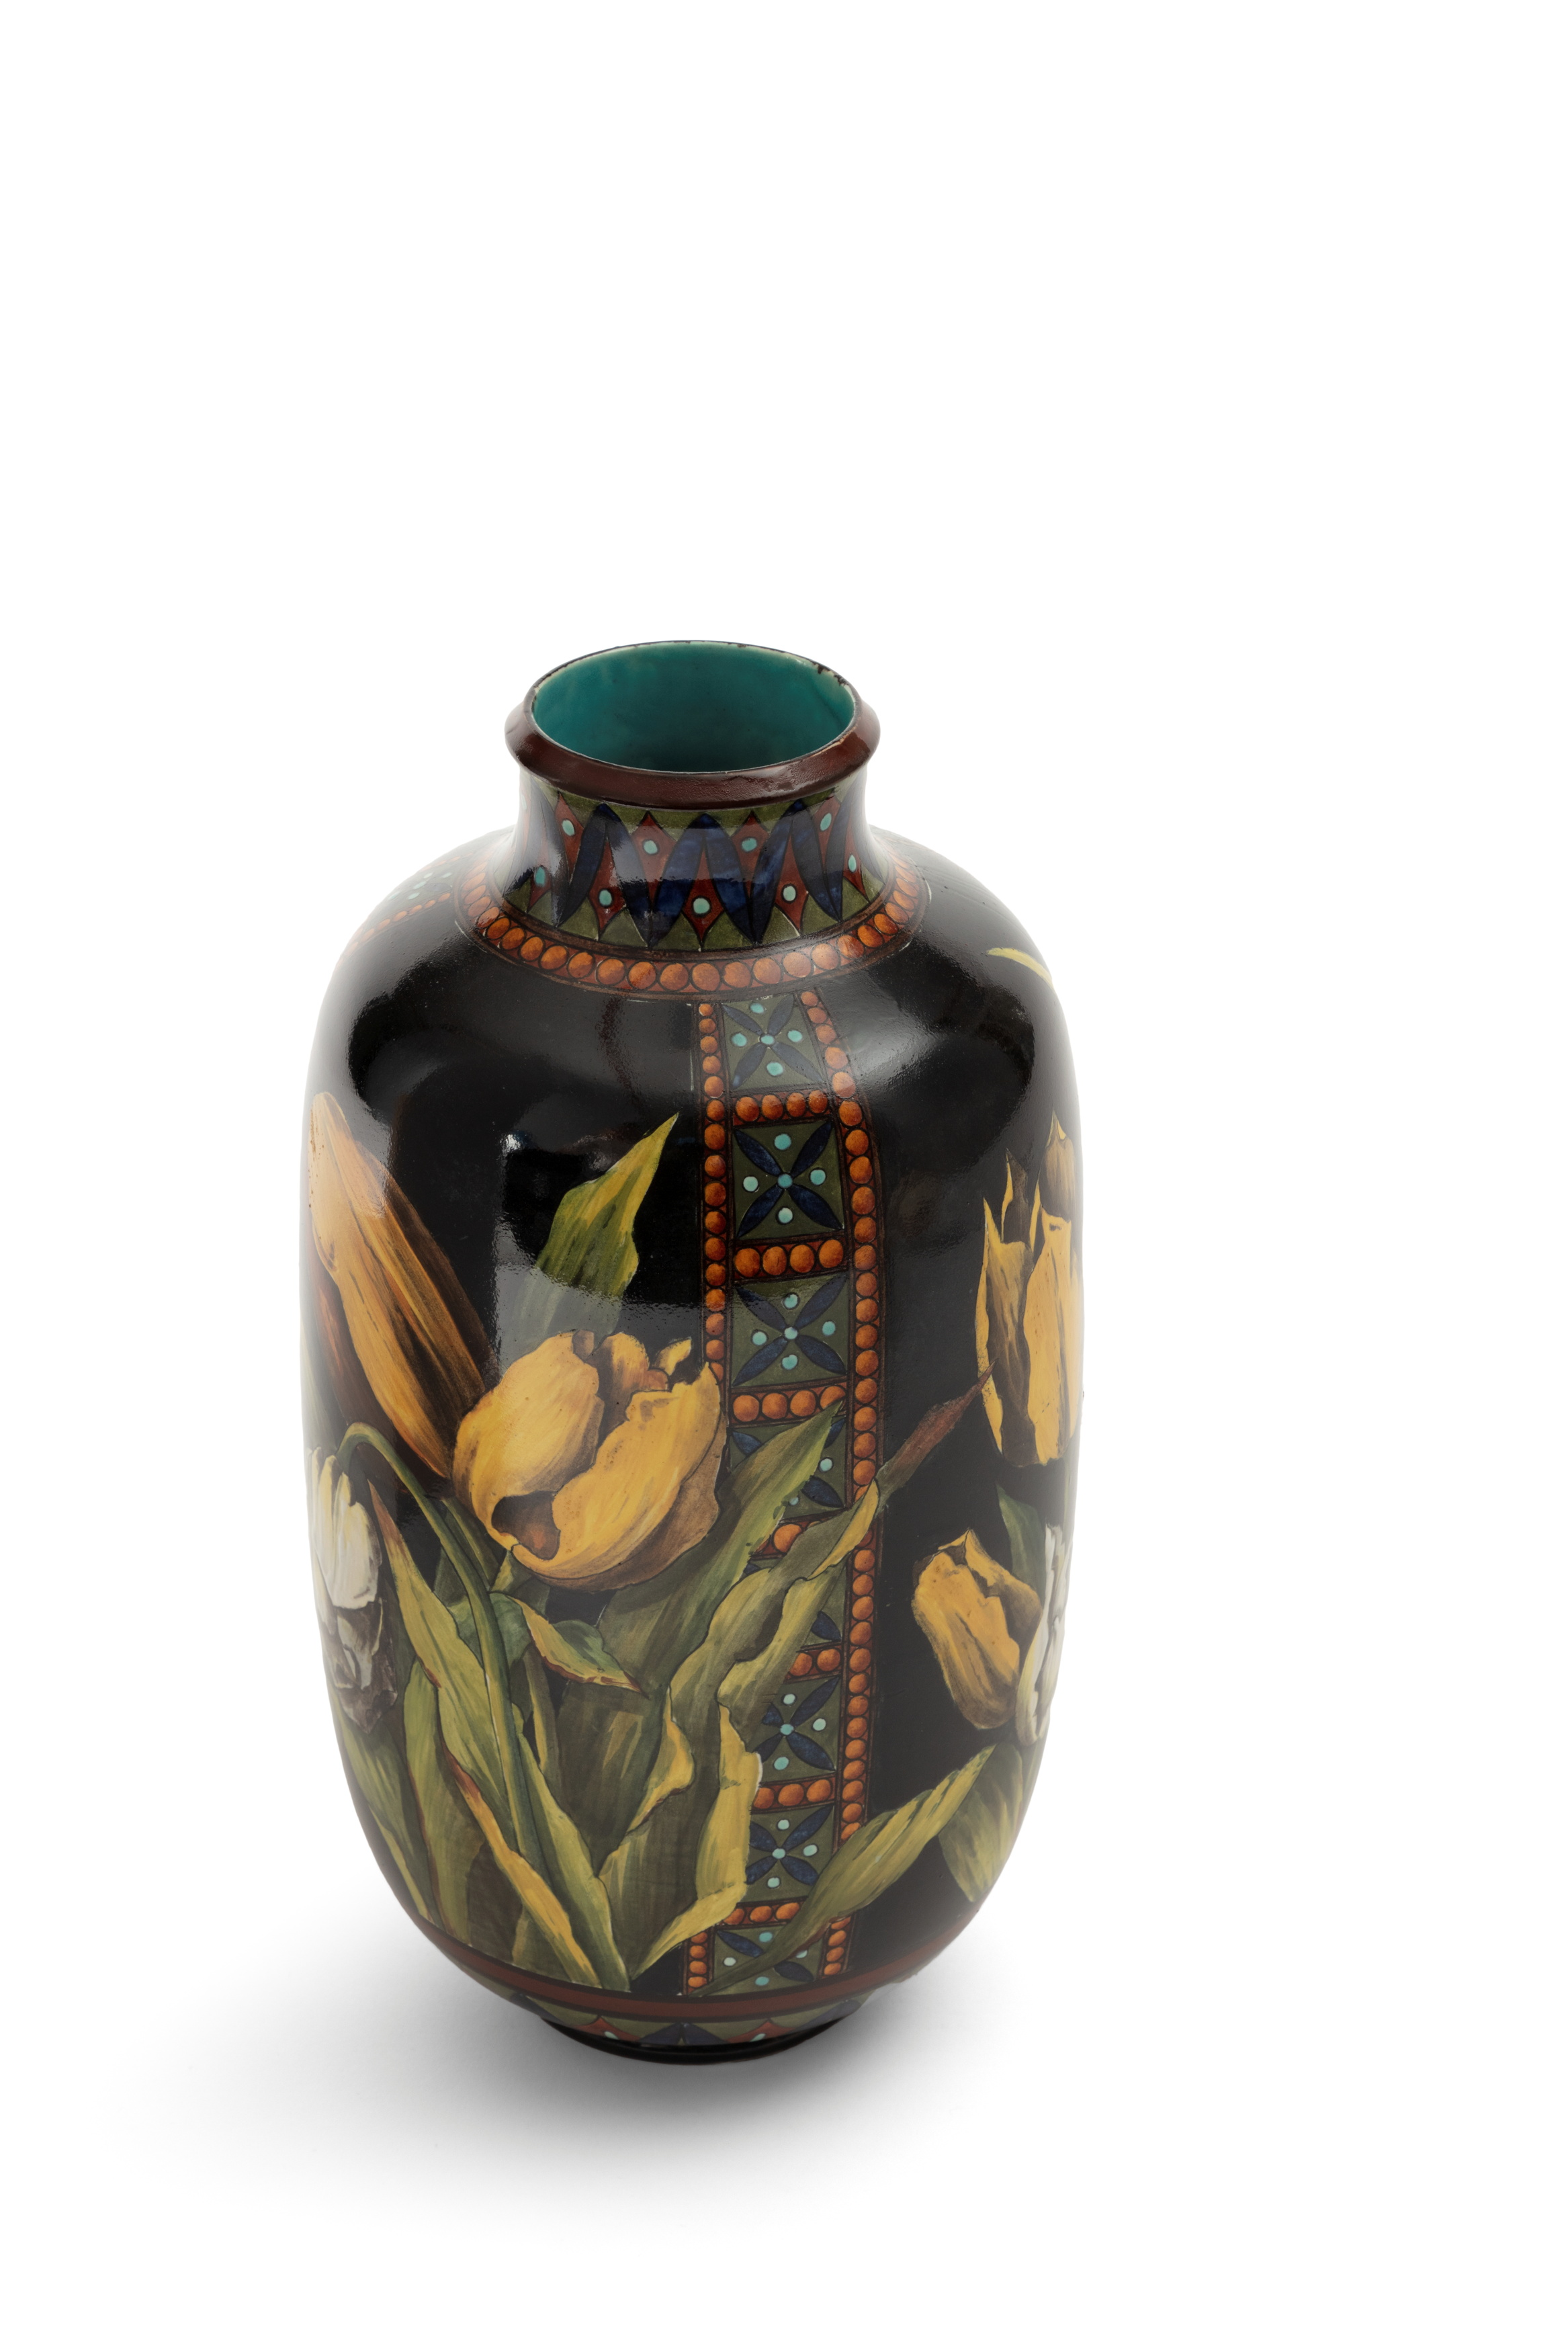 Faience vase by Doulton & Co